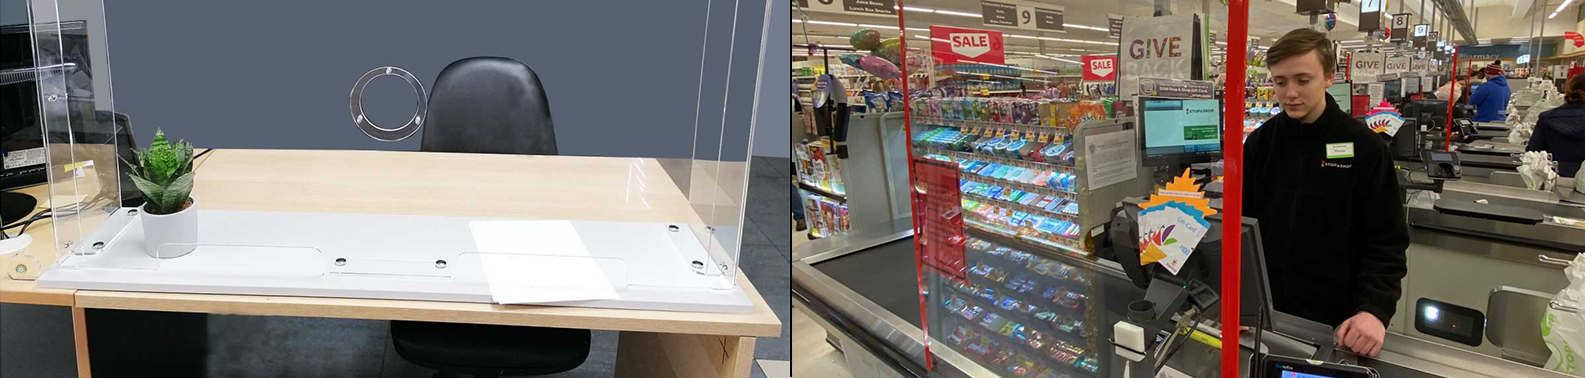 Freestanding Cashier Cashier Checkout Shield With Access Holes